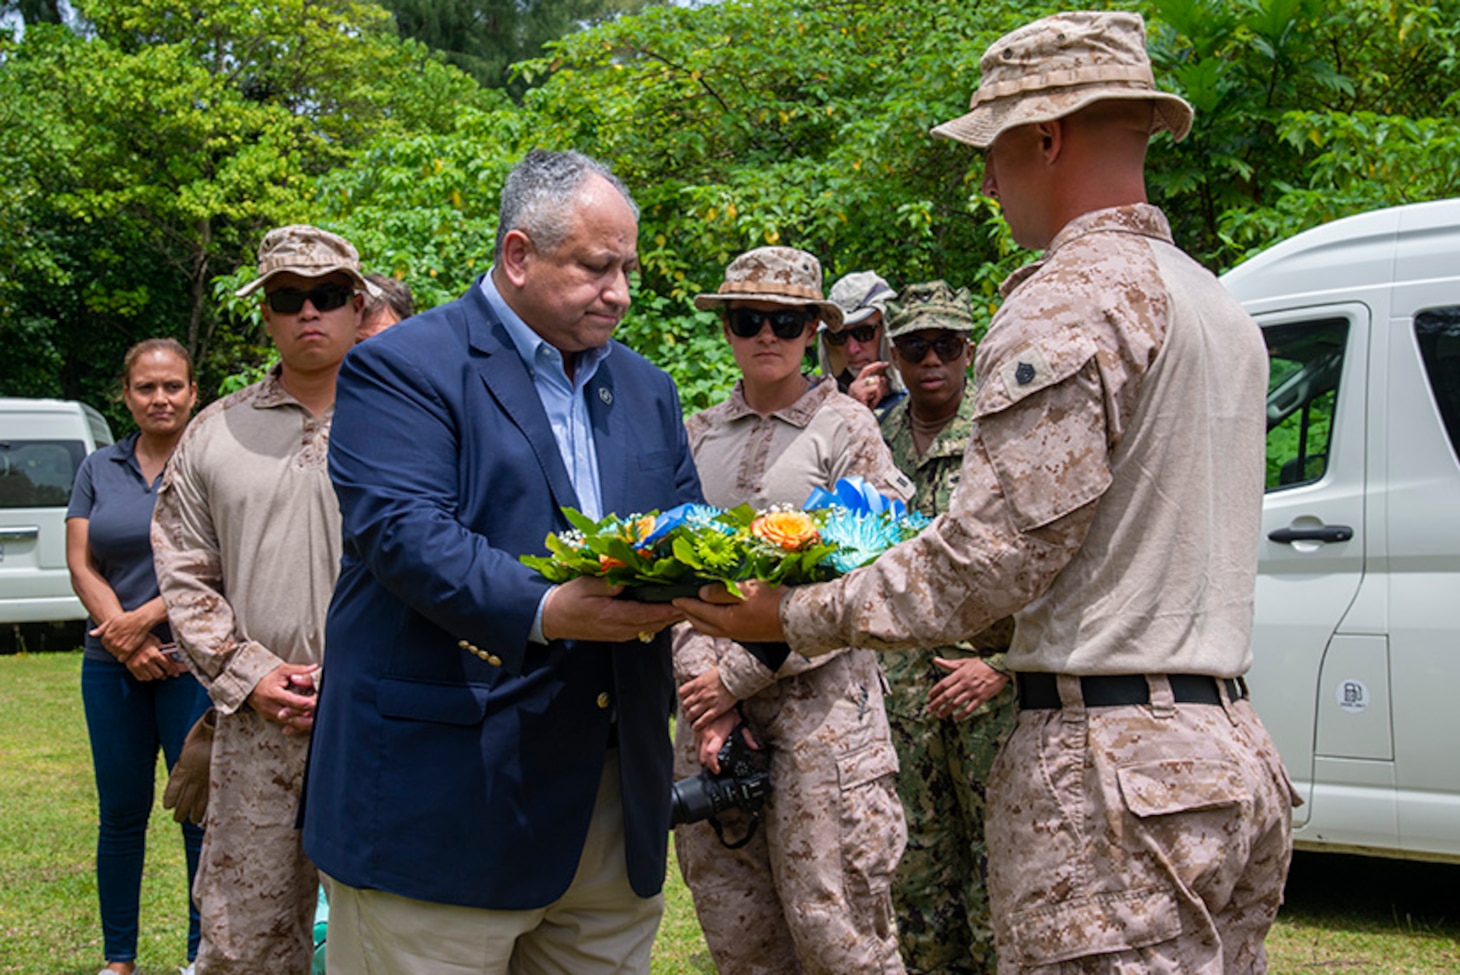 PELELIU, Republic of Palau (March 1, 2024) – Secretary of the Navy Carlos Del Toro participates in a wreath laying at the 81st Infantry Division Memorial in Peleliu, in the Republic of
Palau, March 1. The memorial honors members of the 81st
Infantry Division who assisted the 1st Marine Division during the Battle of Peleliu in World War II. Secretary Del Toro’s visit to Palau is part of a series of strategic engagements in the Indo-Pacific to promote the protection of the maritime commons in line with his Maritime Statecraft efforts. (U.S. Navy photo by Shaina O’Neal/Released)